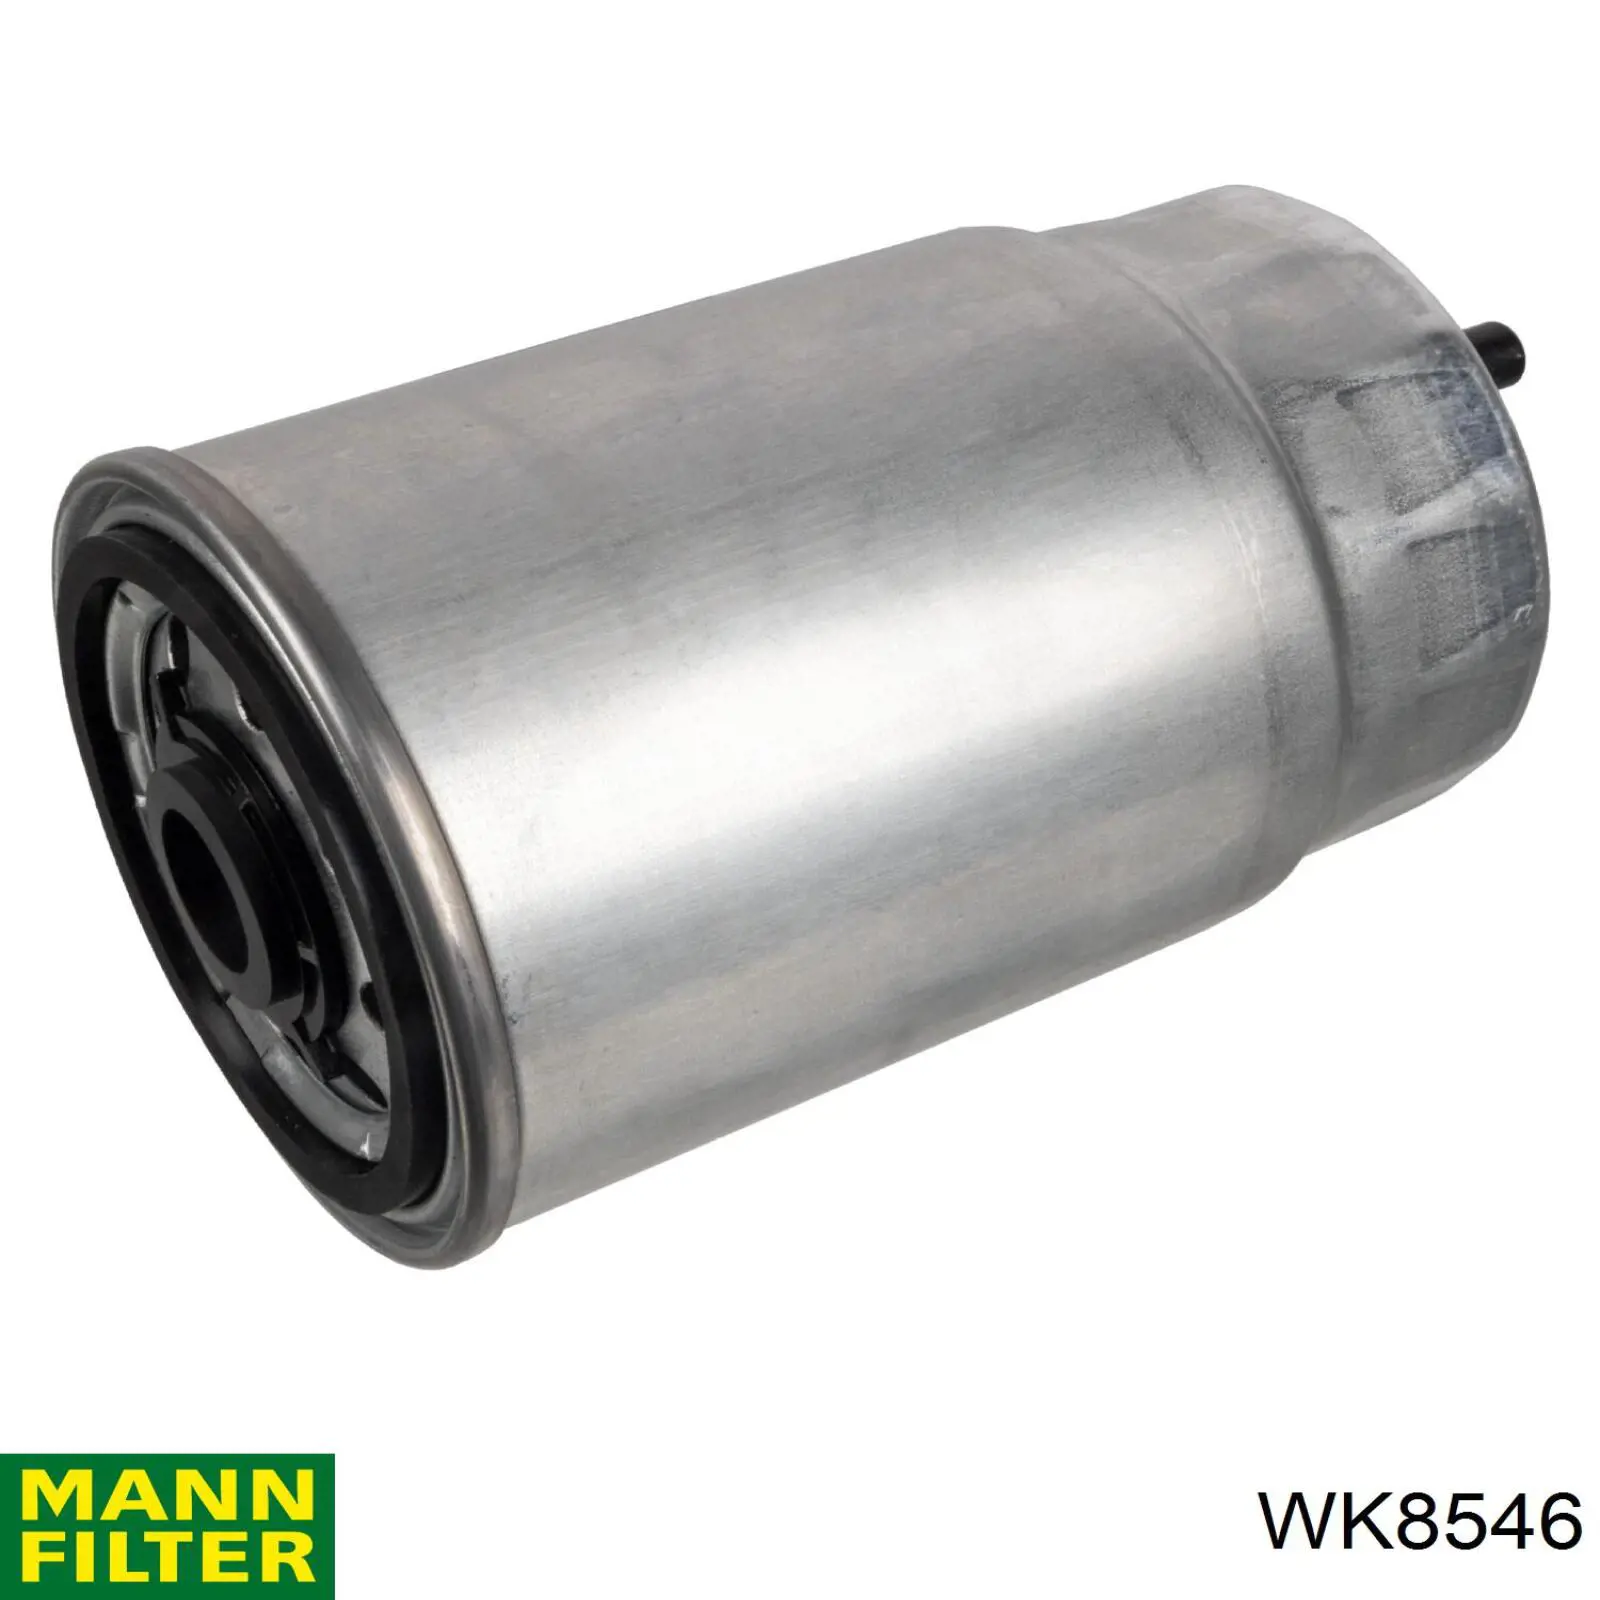 Filtro combustible WK8546 Mann-Filter